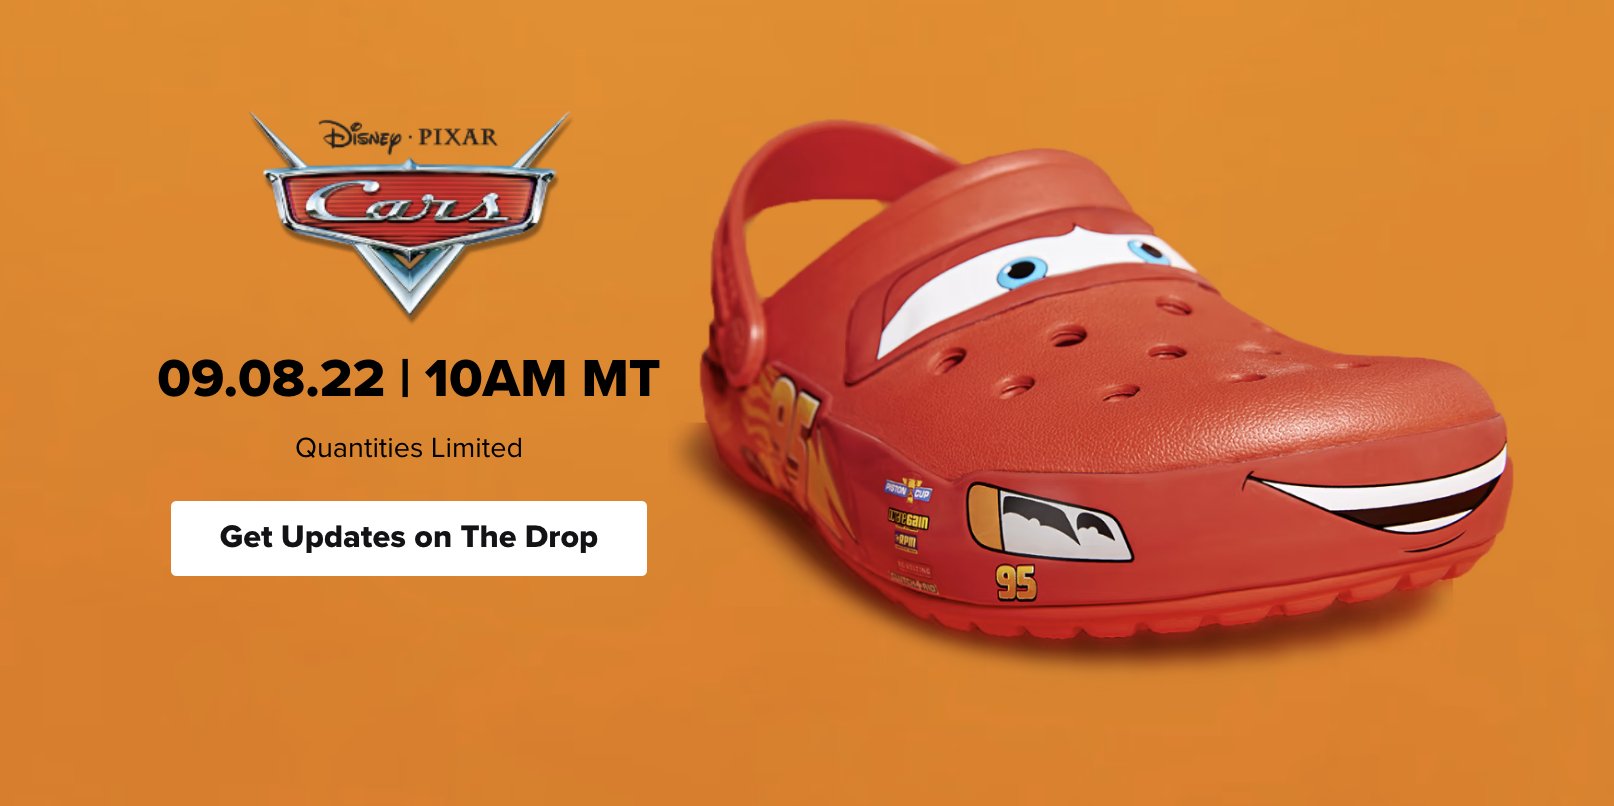 The infamous Lightning McQueen Crocs are restocking again on